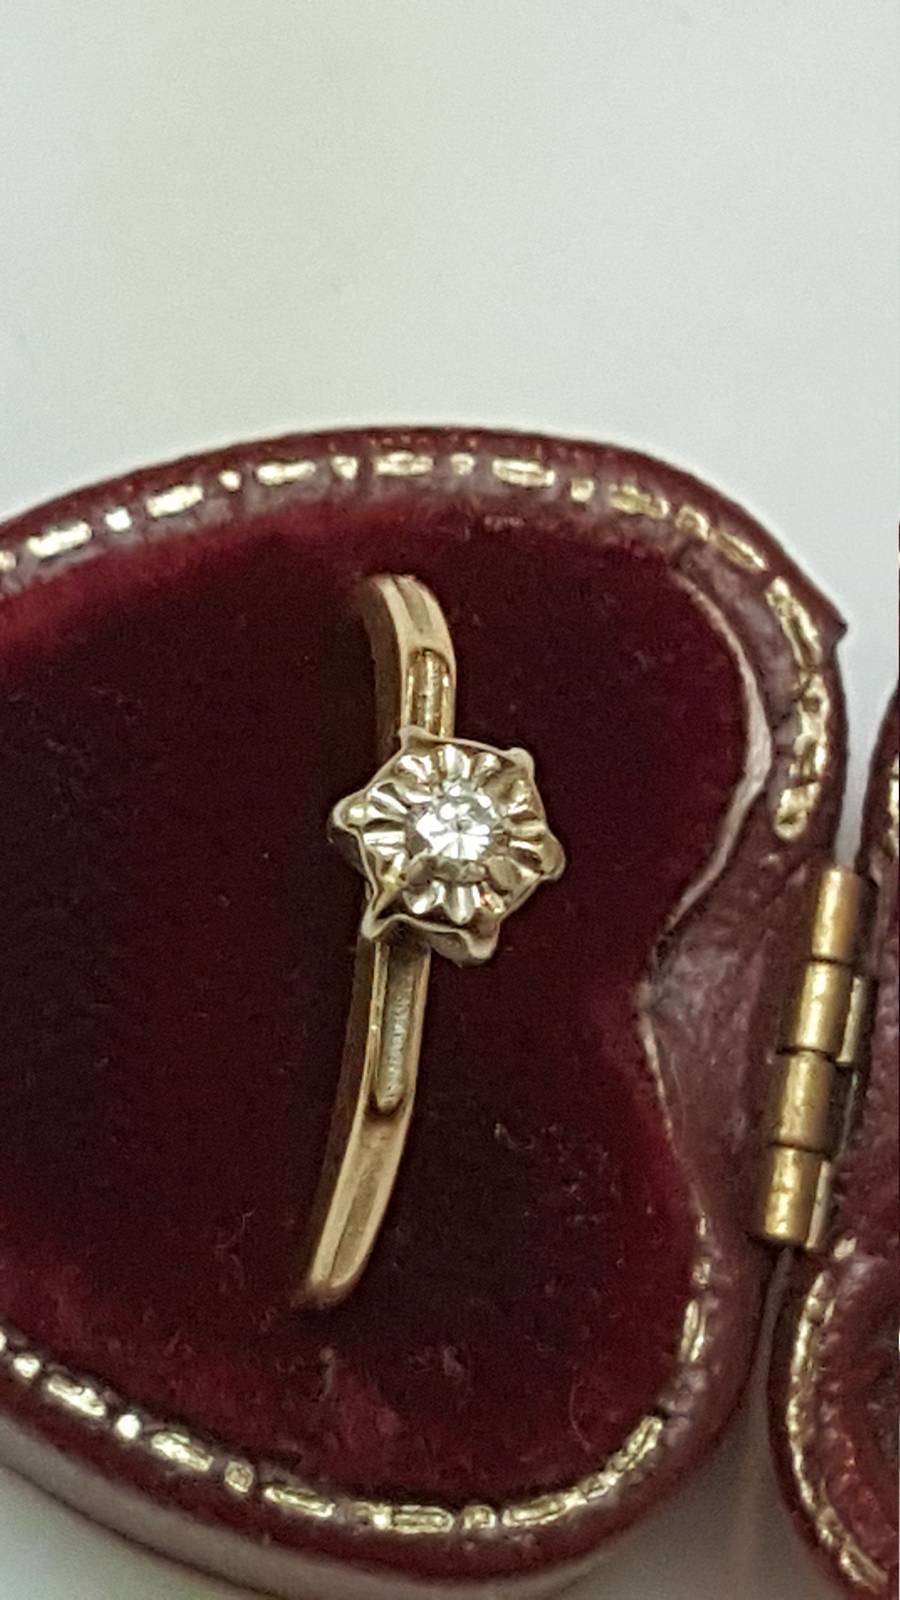 Primary image for Art Deco  14kt yellow  Gold  .10ct Solitaire  Diamond  Ring, 1930s